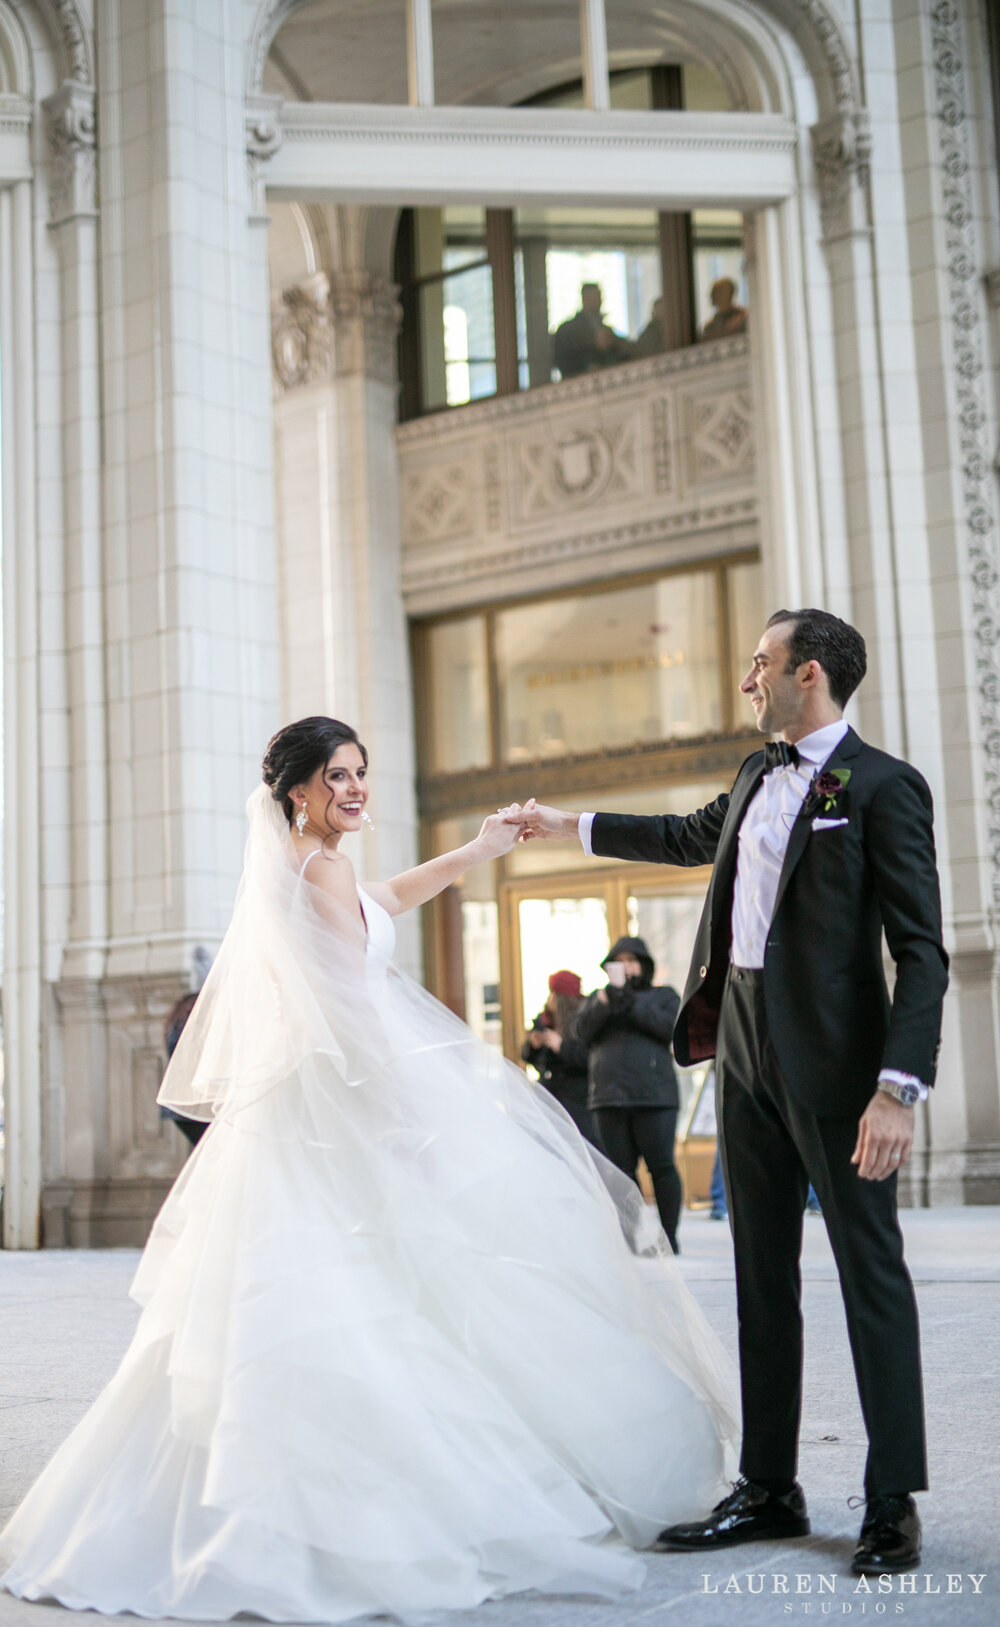 intercontinental-chicago-high-end-michigan-ave-magnificent-mile-wedding-chicago-wedding-photography-61.jpg